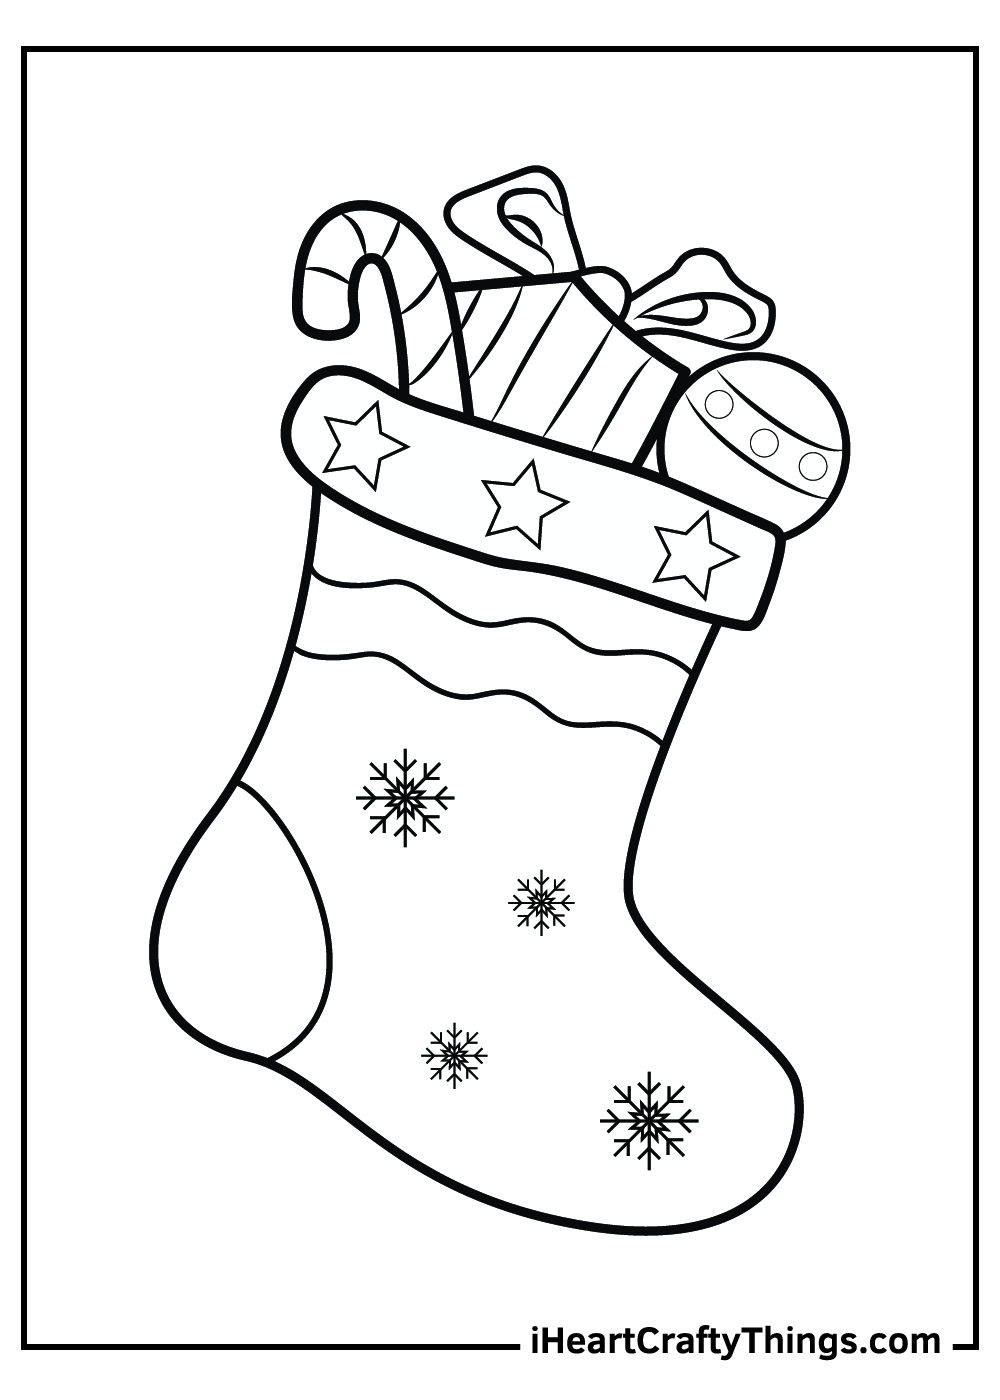 Christmas stocking coloring pages free printables